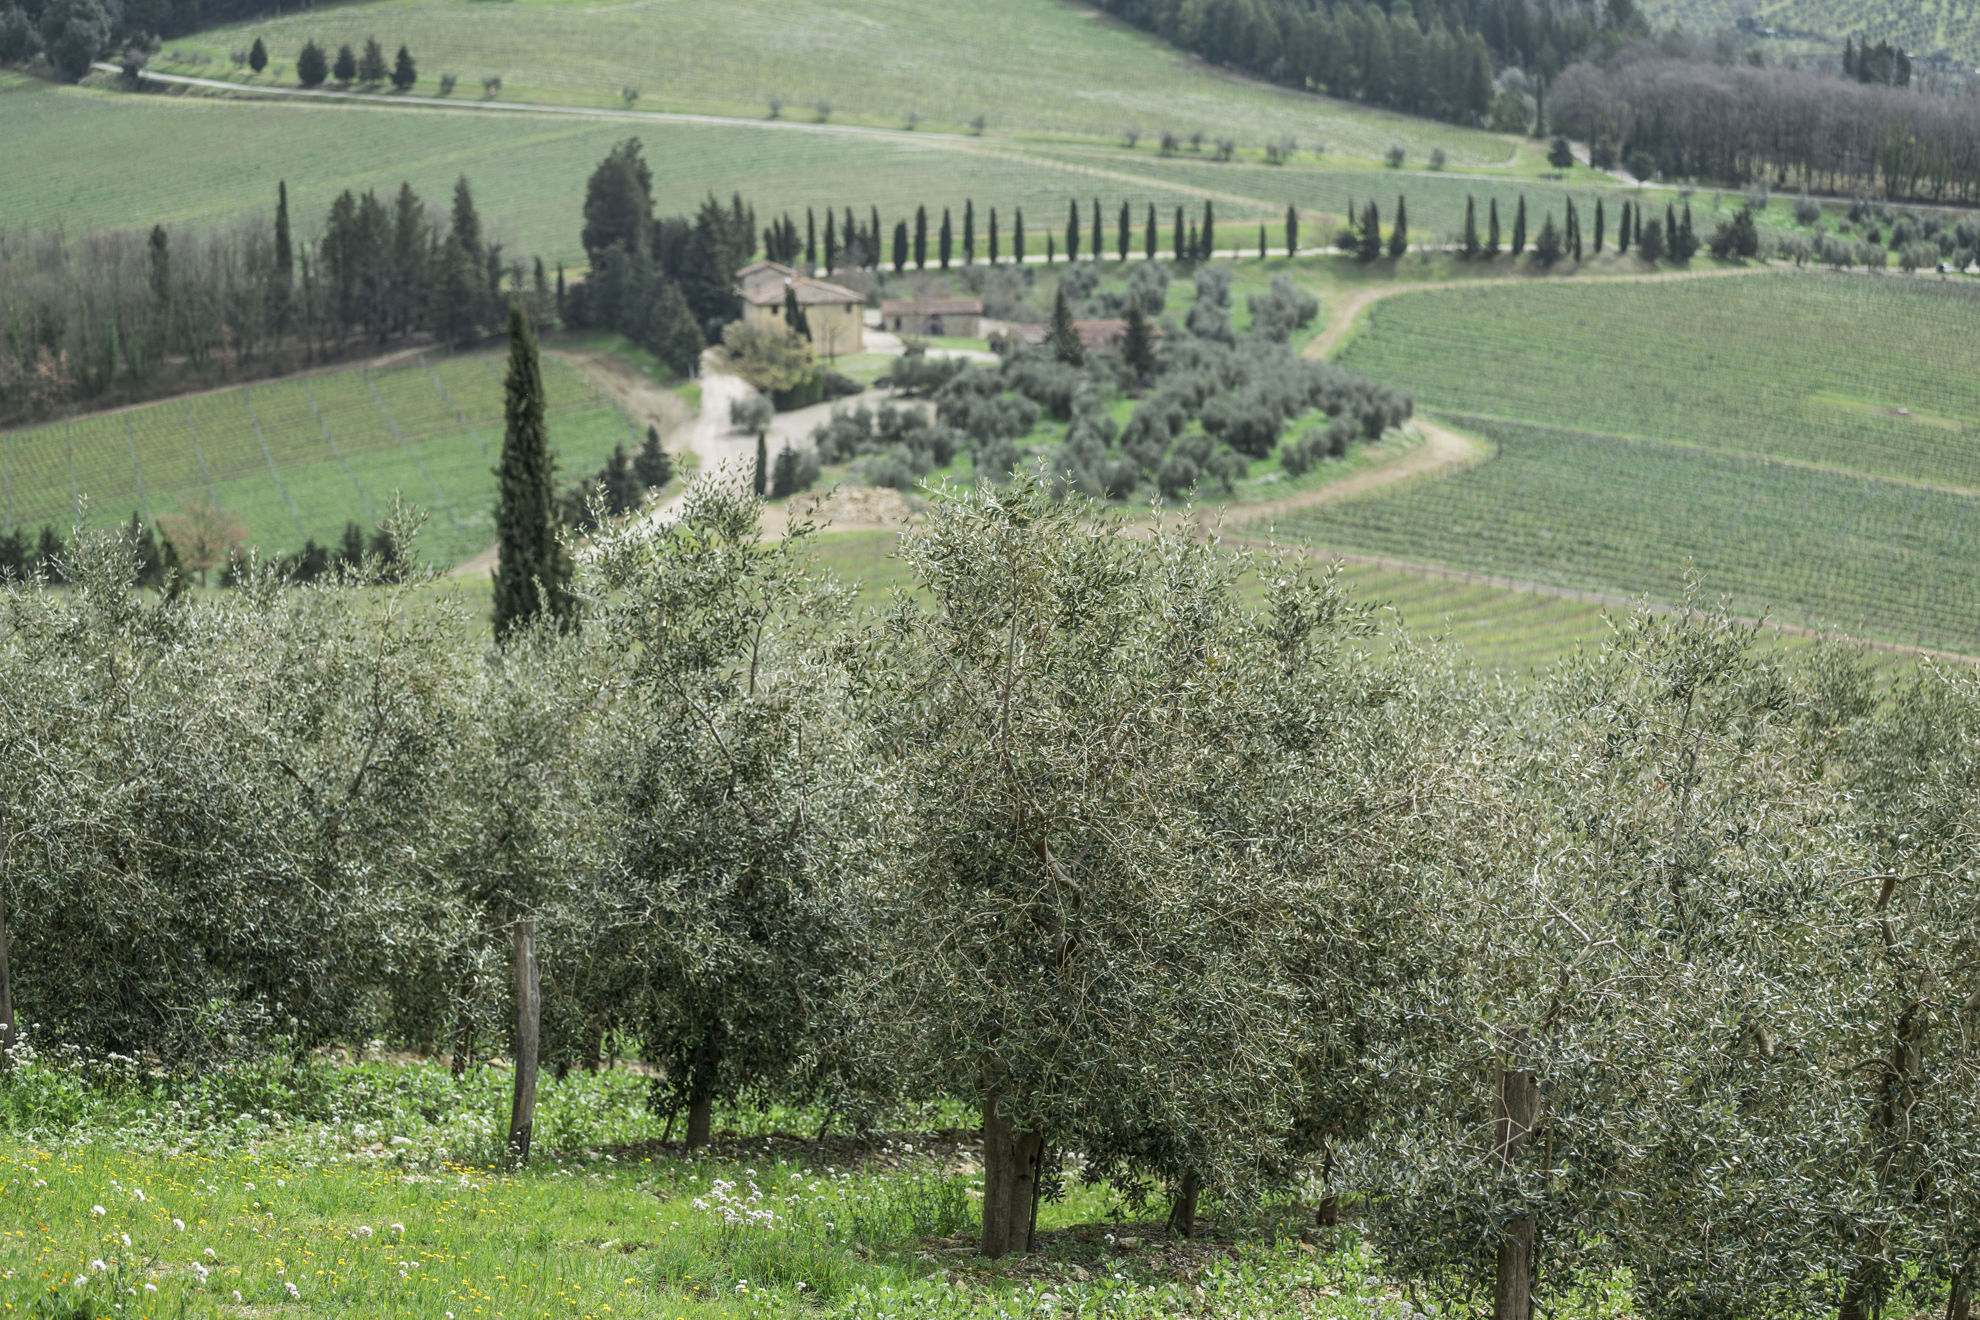 Olive oil tasting in Tuscany - Visit the olive groves and facilities